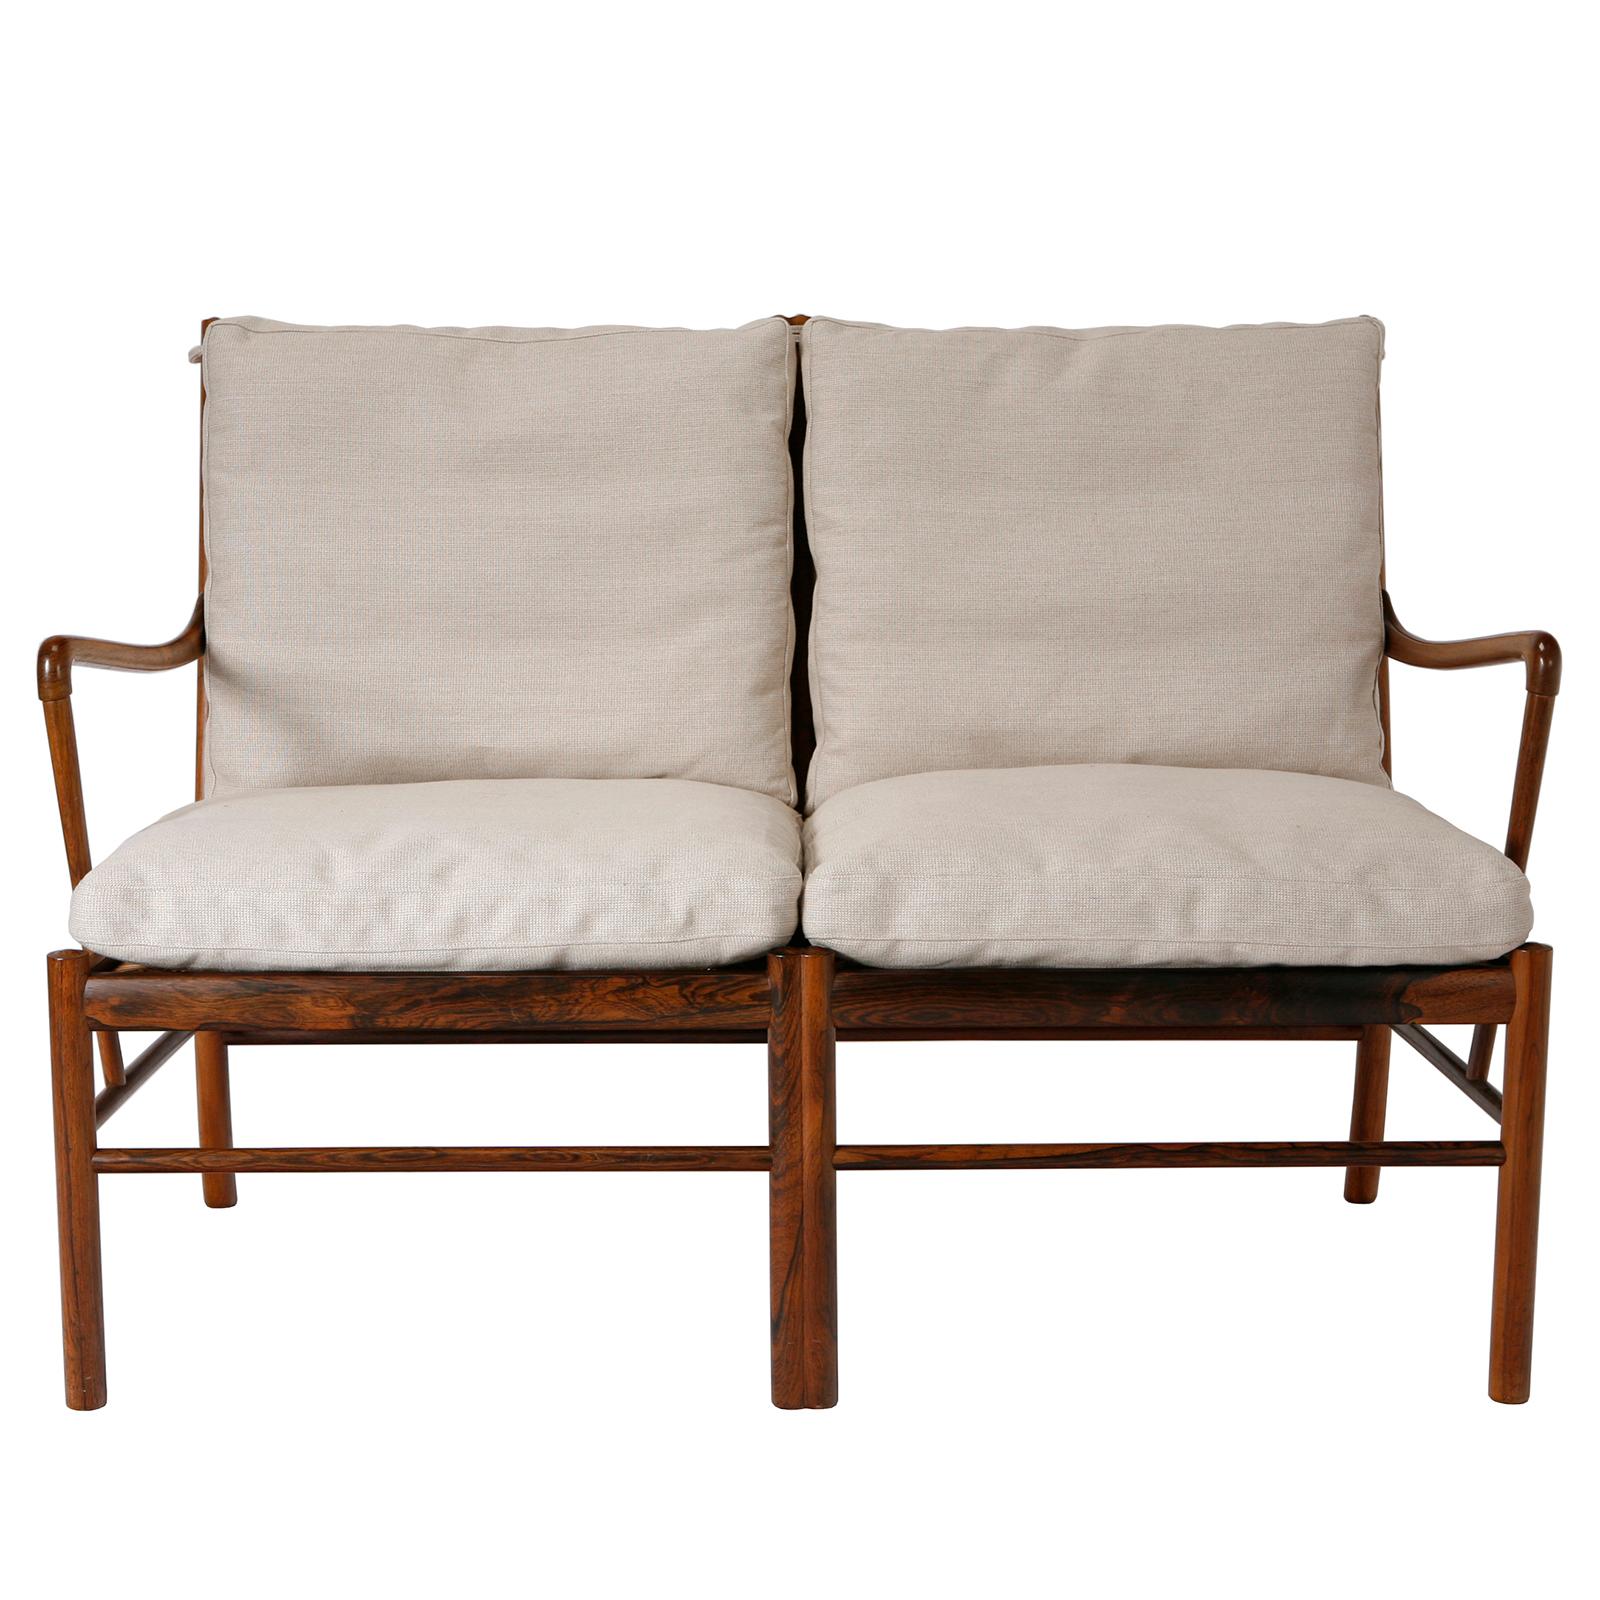 An early two-seat Colonial sofa in rosewood with loose down-filled cushions upholstered in new cream coloured textile. Designed in 1949 by Ole Wanscher, made by P. Jeppesen, Denmark.